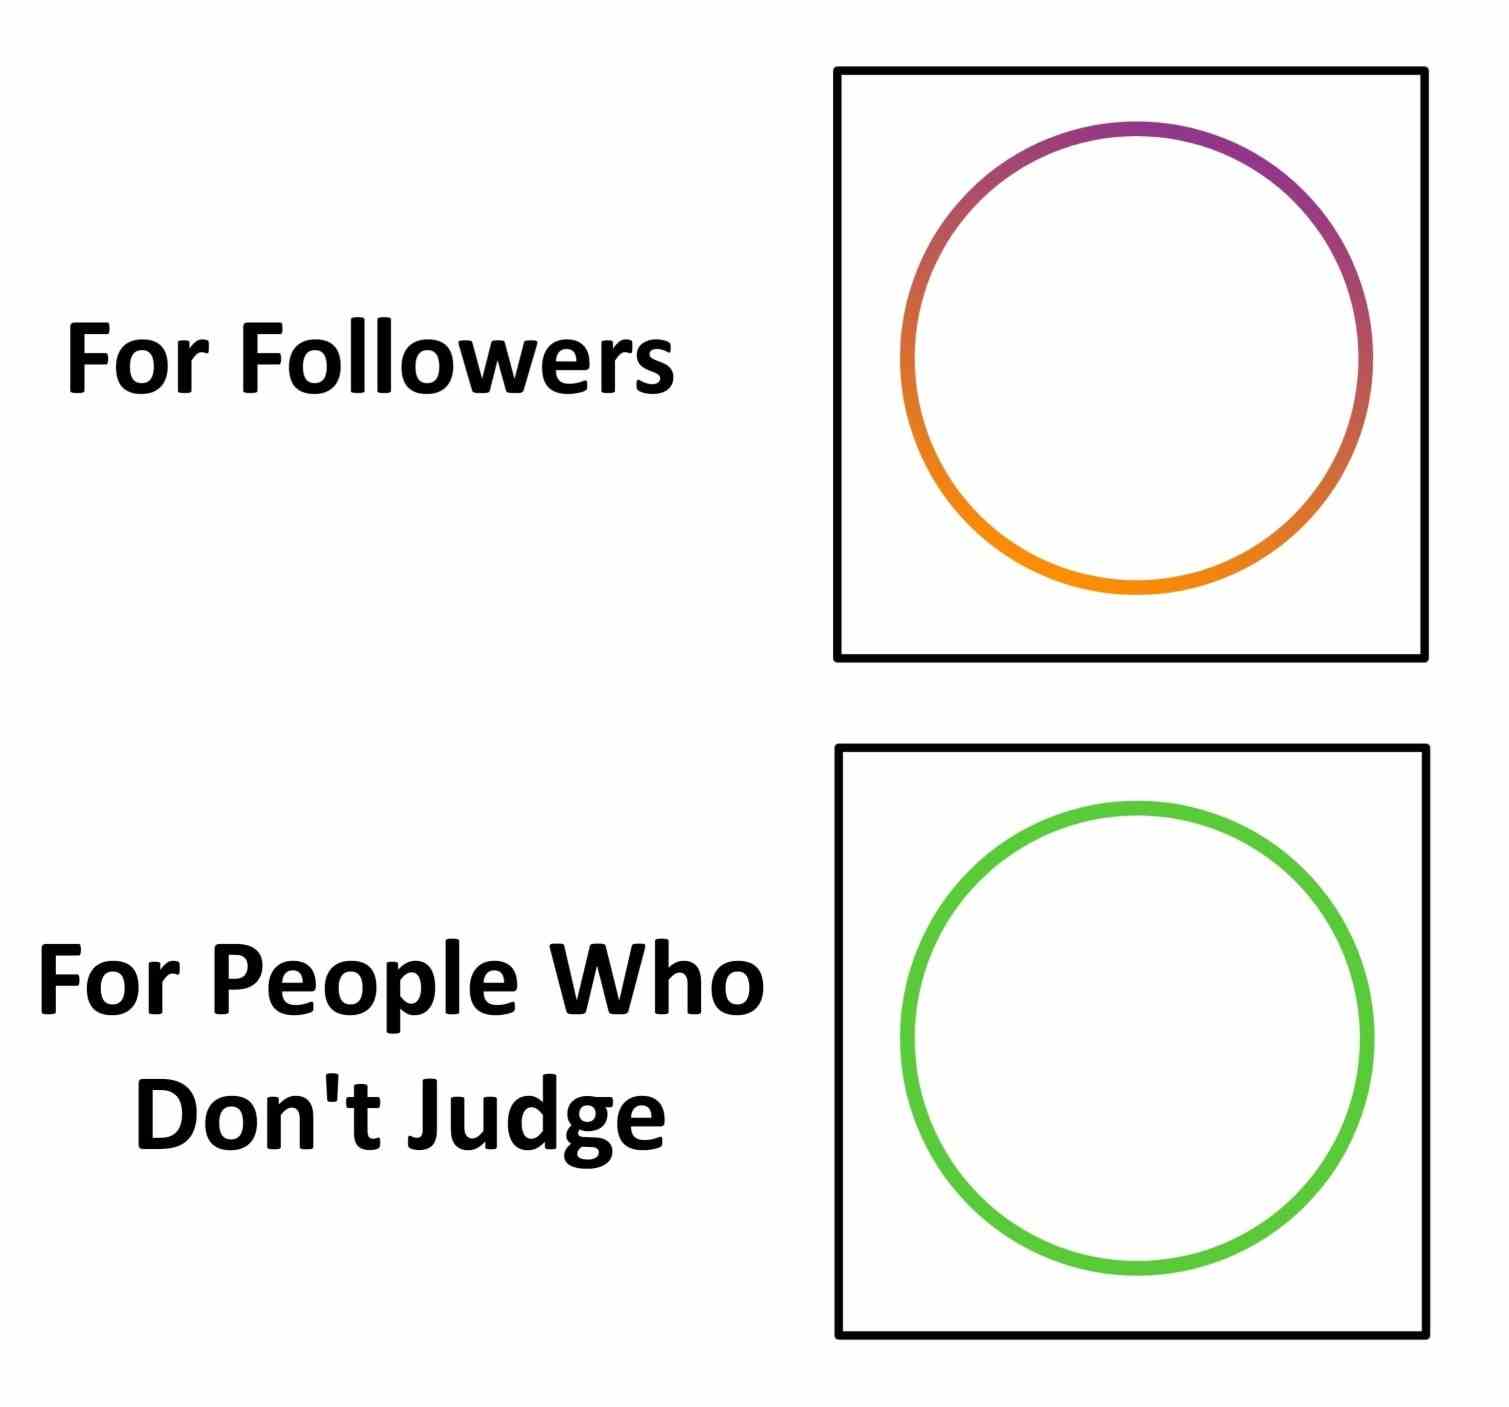 For followers vs For people who don't judge